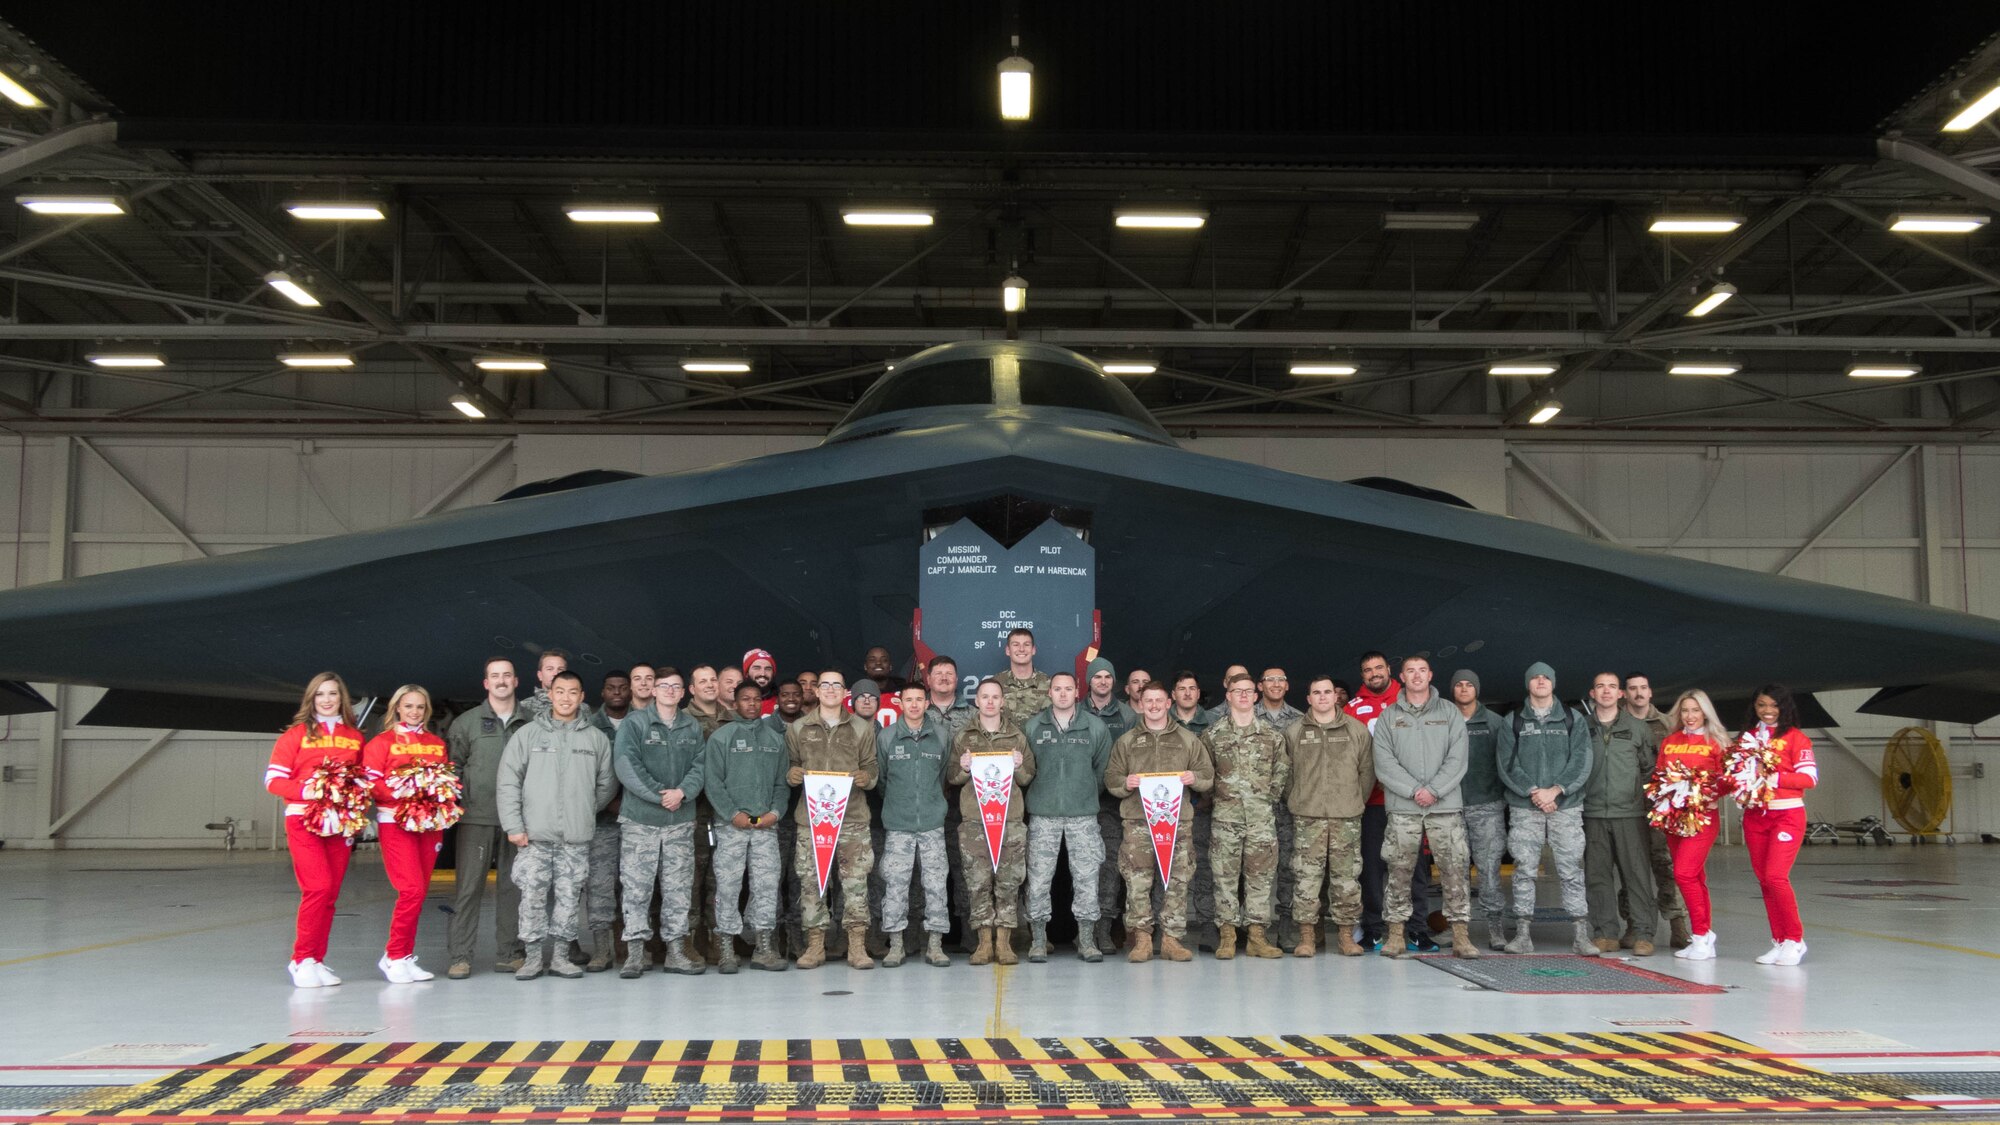 National Football League’s Kansas City Chiefs linemen and cheerleaders pose for a photo in front of a B-2 Spirit with members of Team Whiteman.